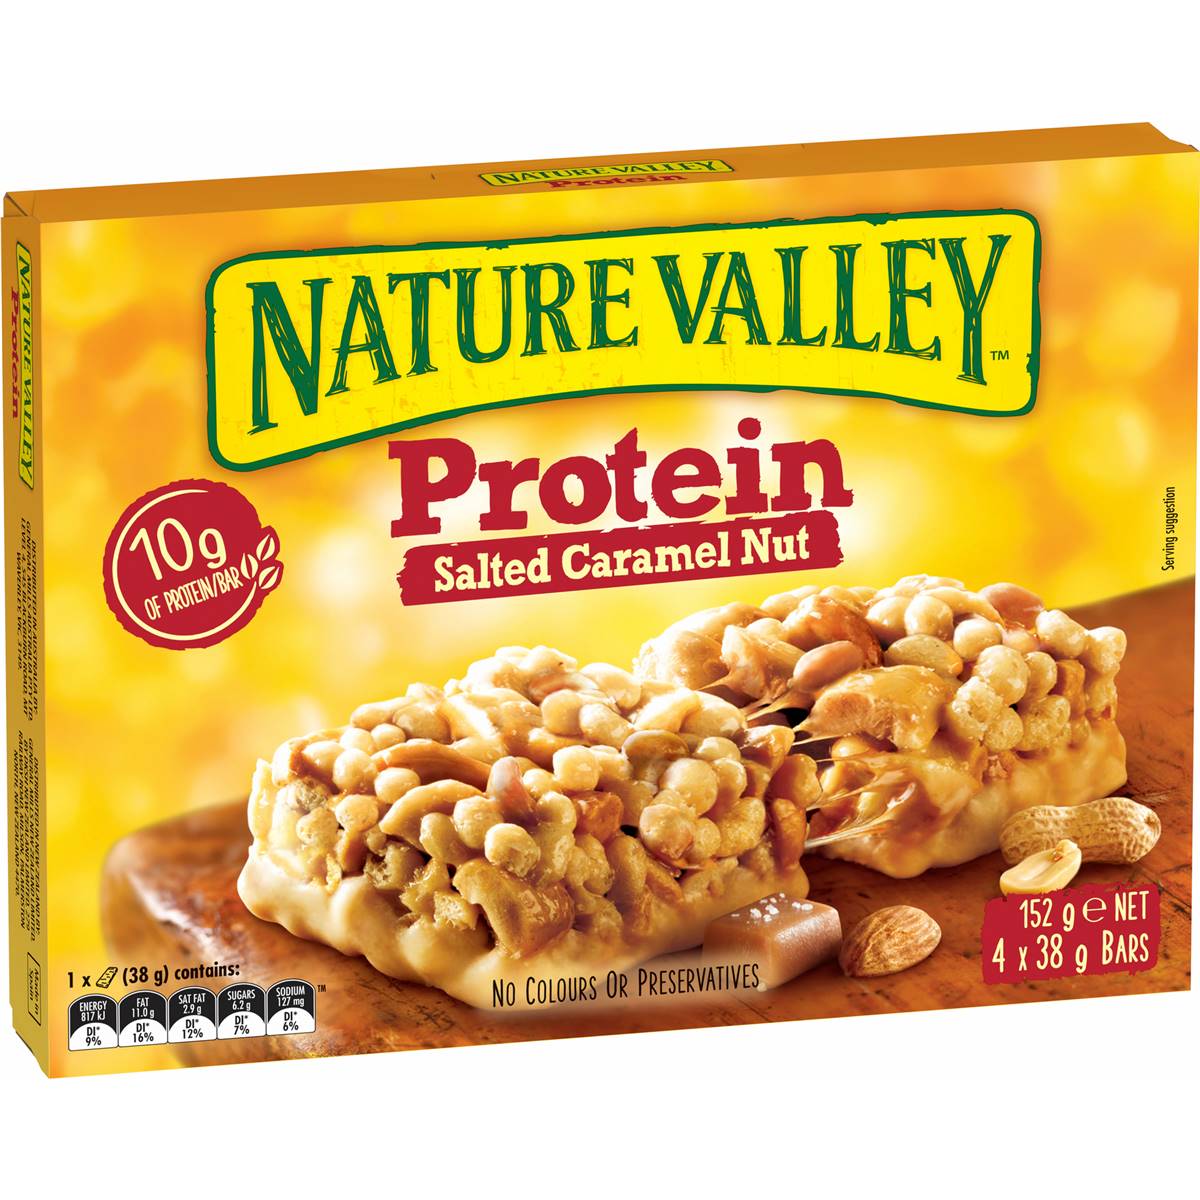 Calories in Nature Valley Salted Caramel Protein Nut Bars